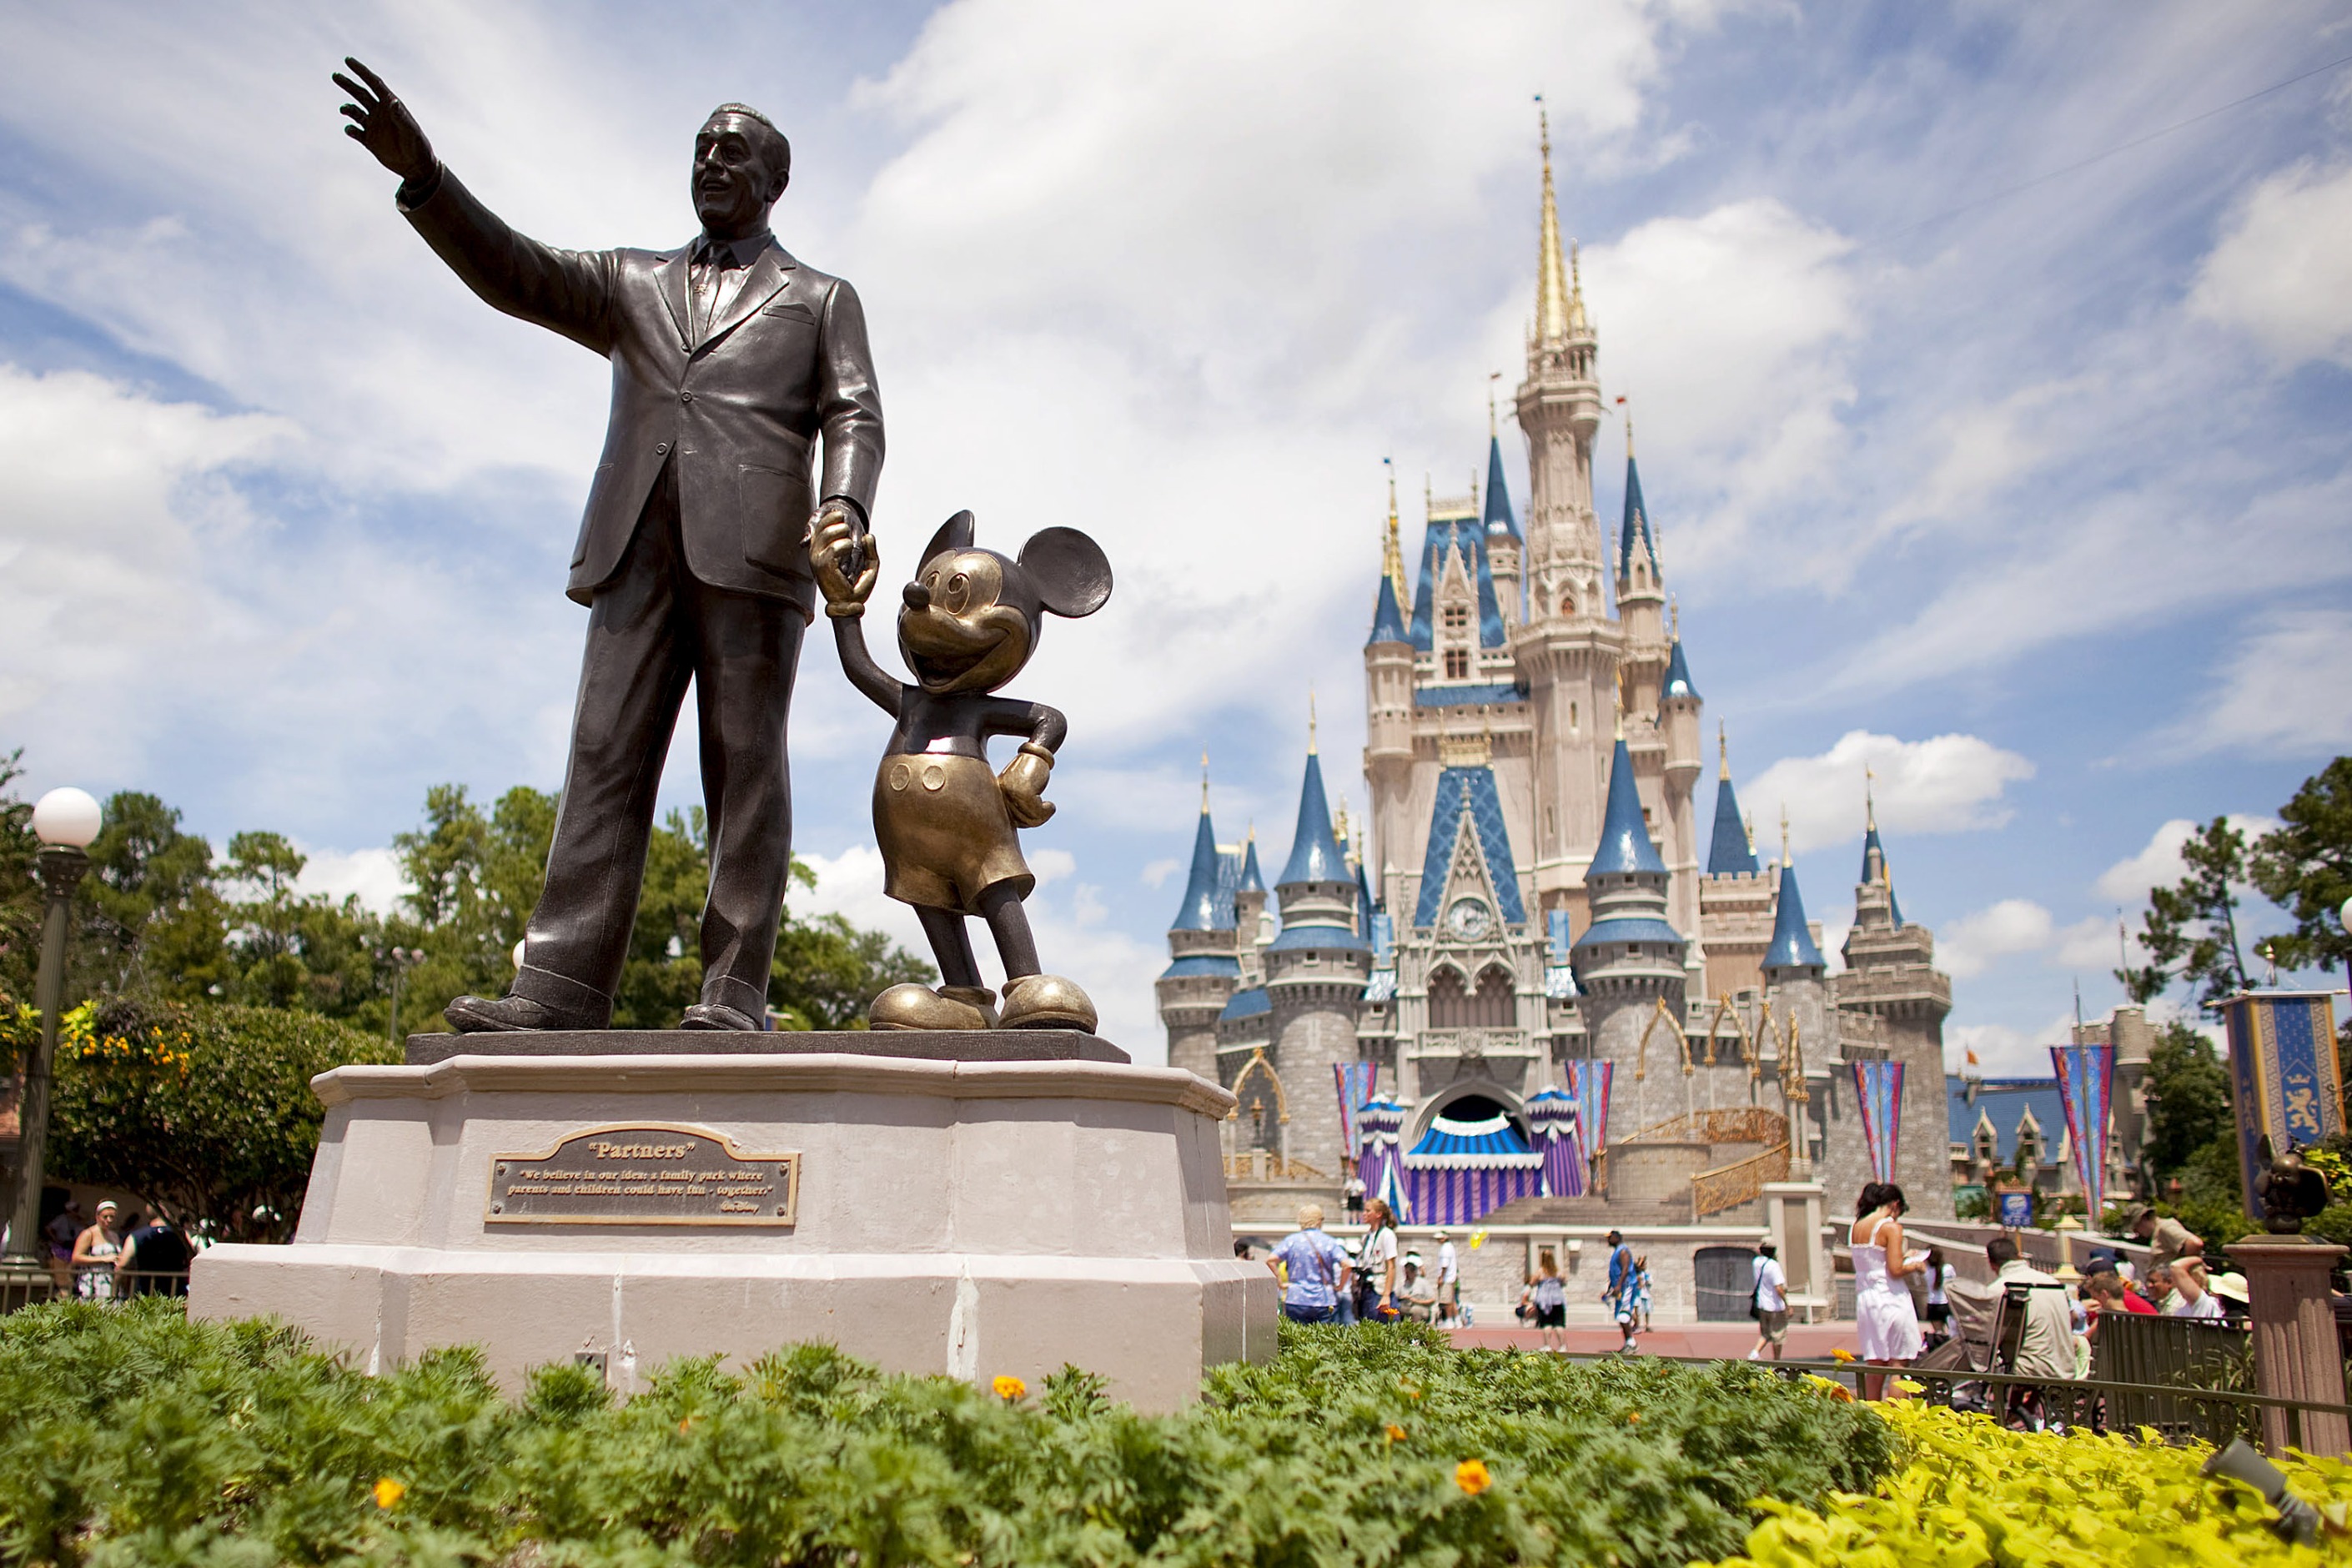 Disney Adults Pay a Hefty Price for Freedom - Inside the Magic